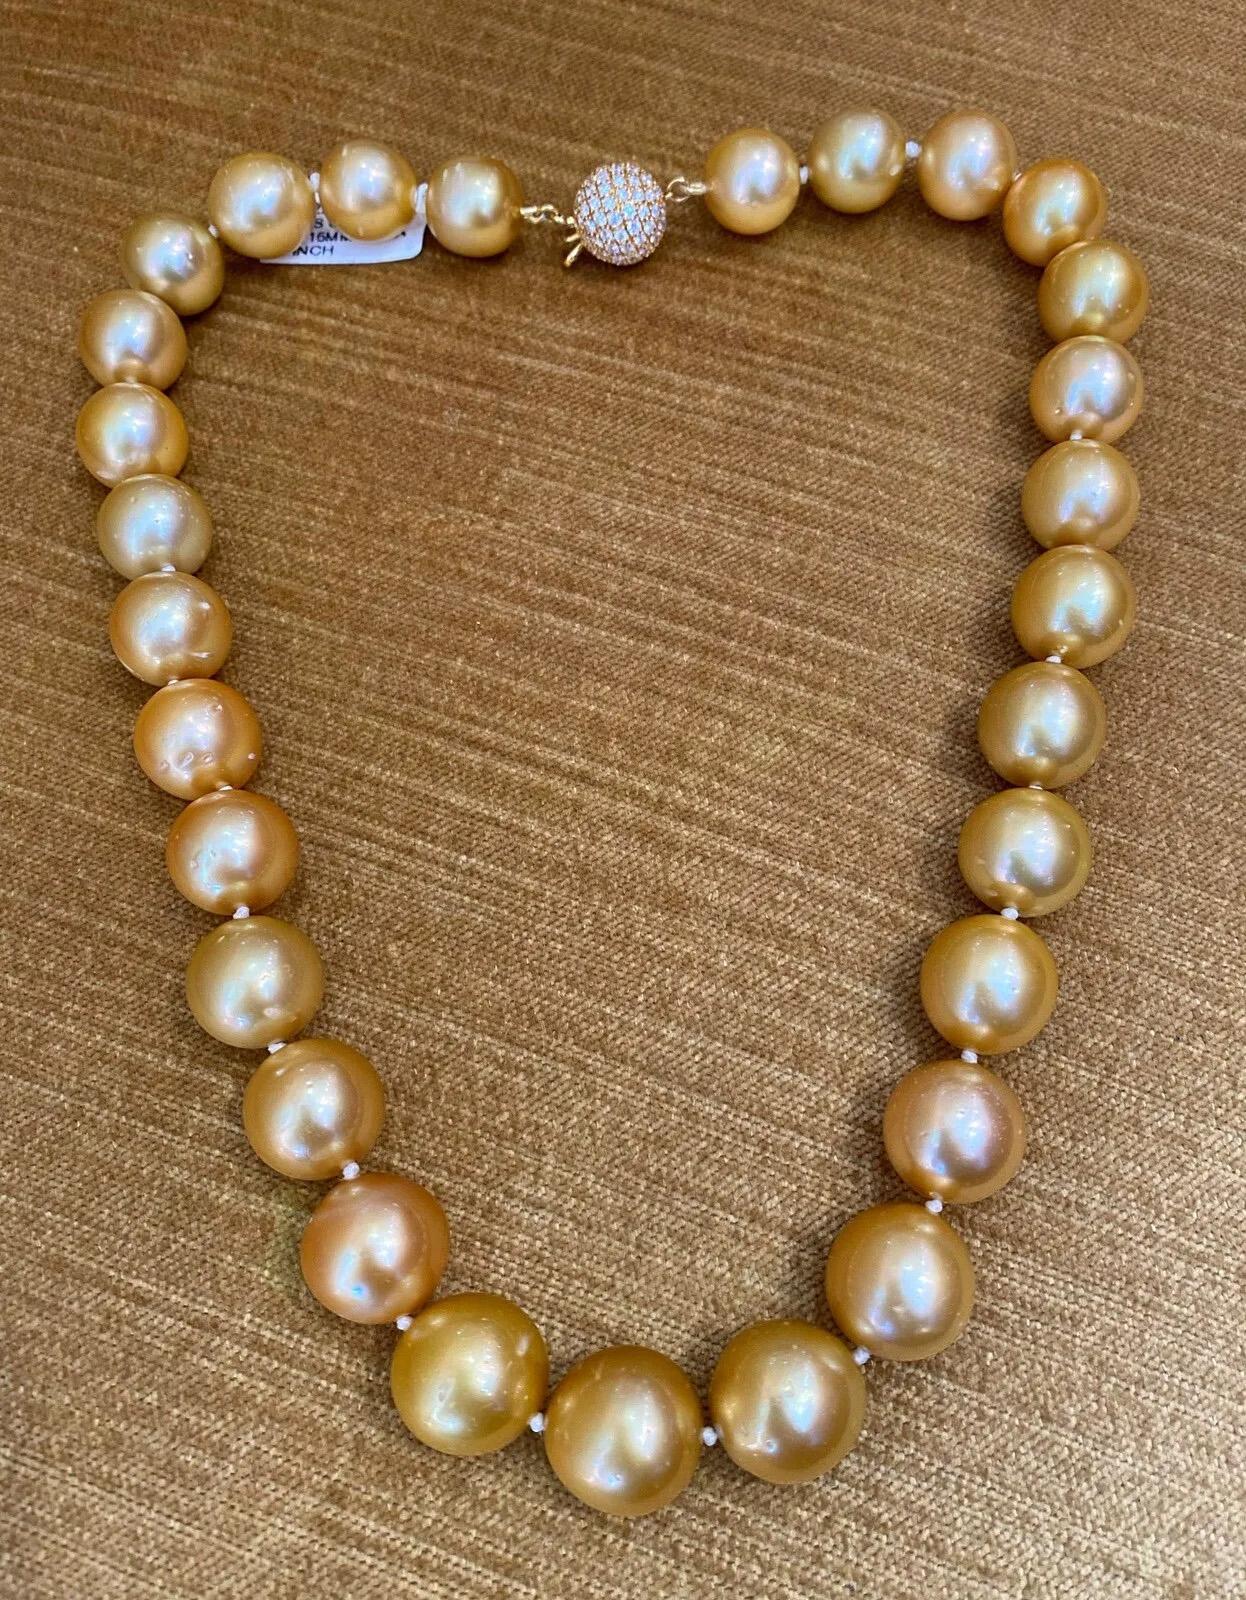 Golden South Sea Pearls & Diamond Necklace in 18k Yellow Gold

Golden South Sea Pearls and Diamond Necklace features 29 Golden South Sea Pearls and one Pavè Diamond Ball Clasp with Round Brilliant cut Diamond covering the entire clasp in 18k Yellow